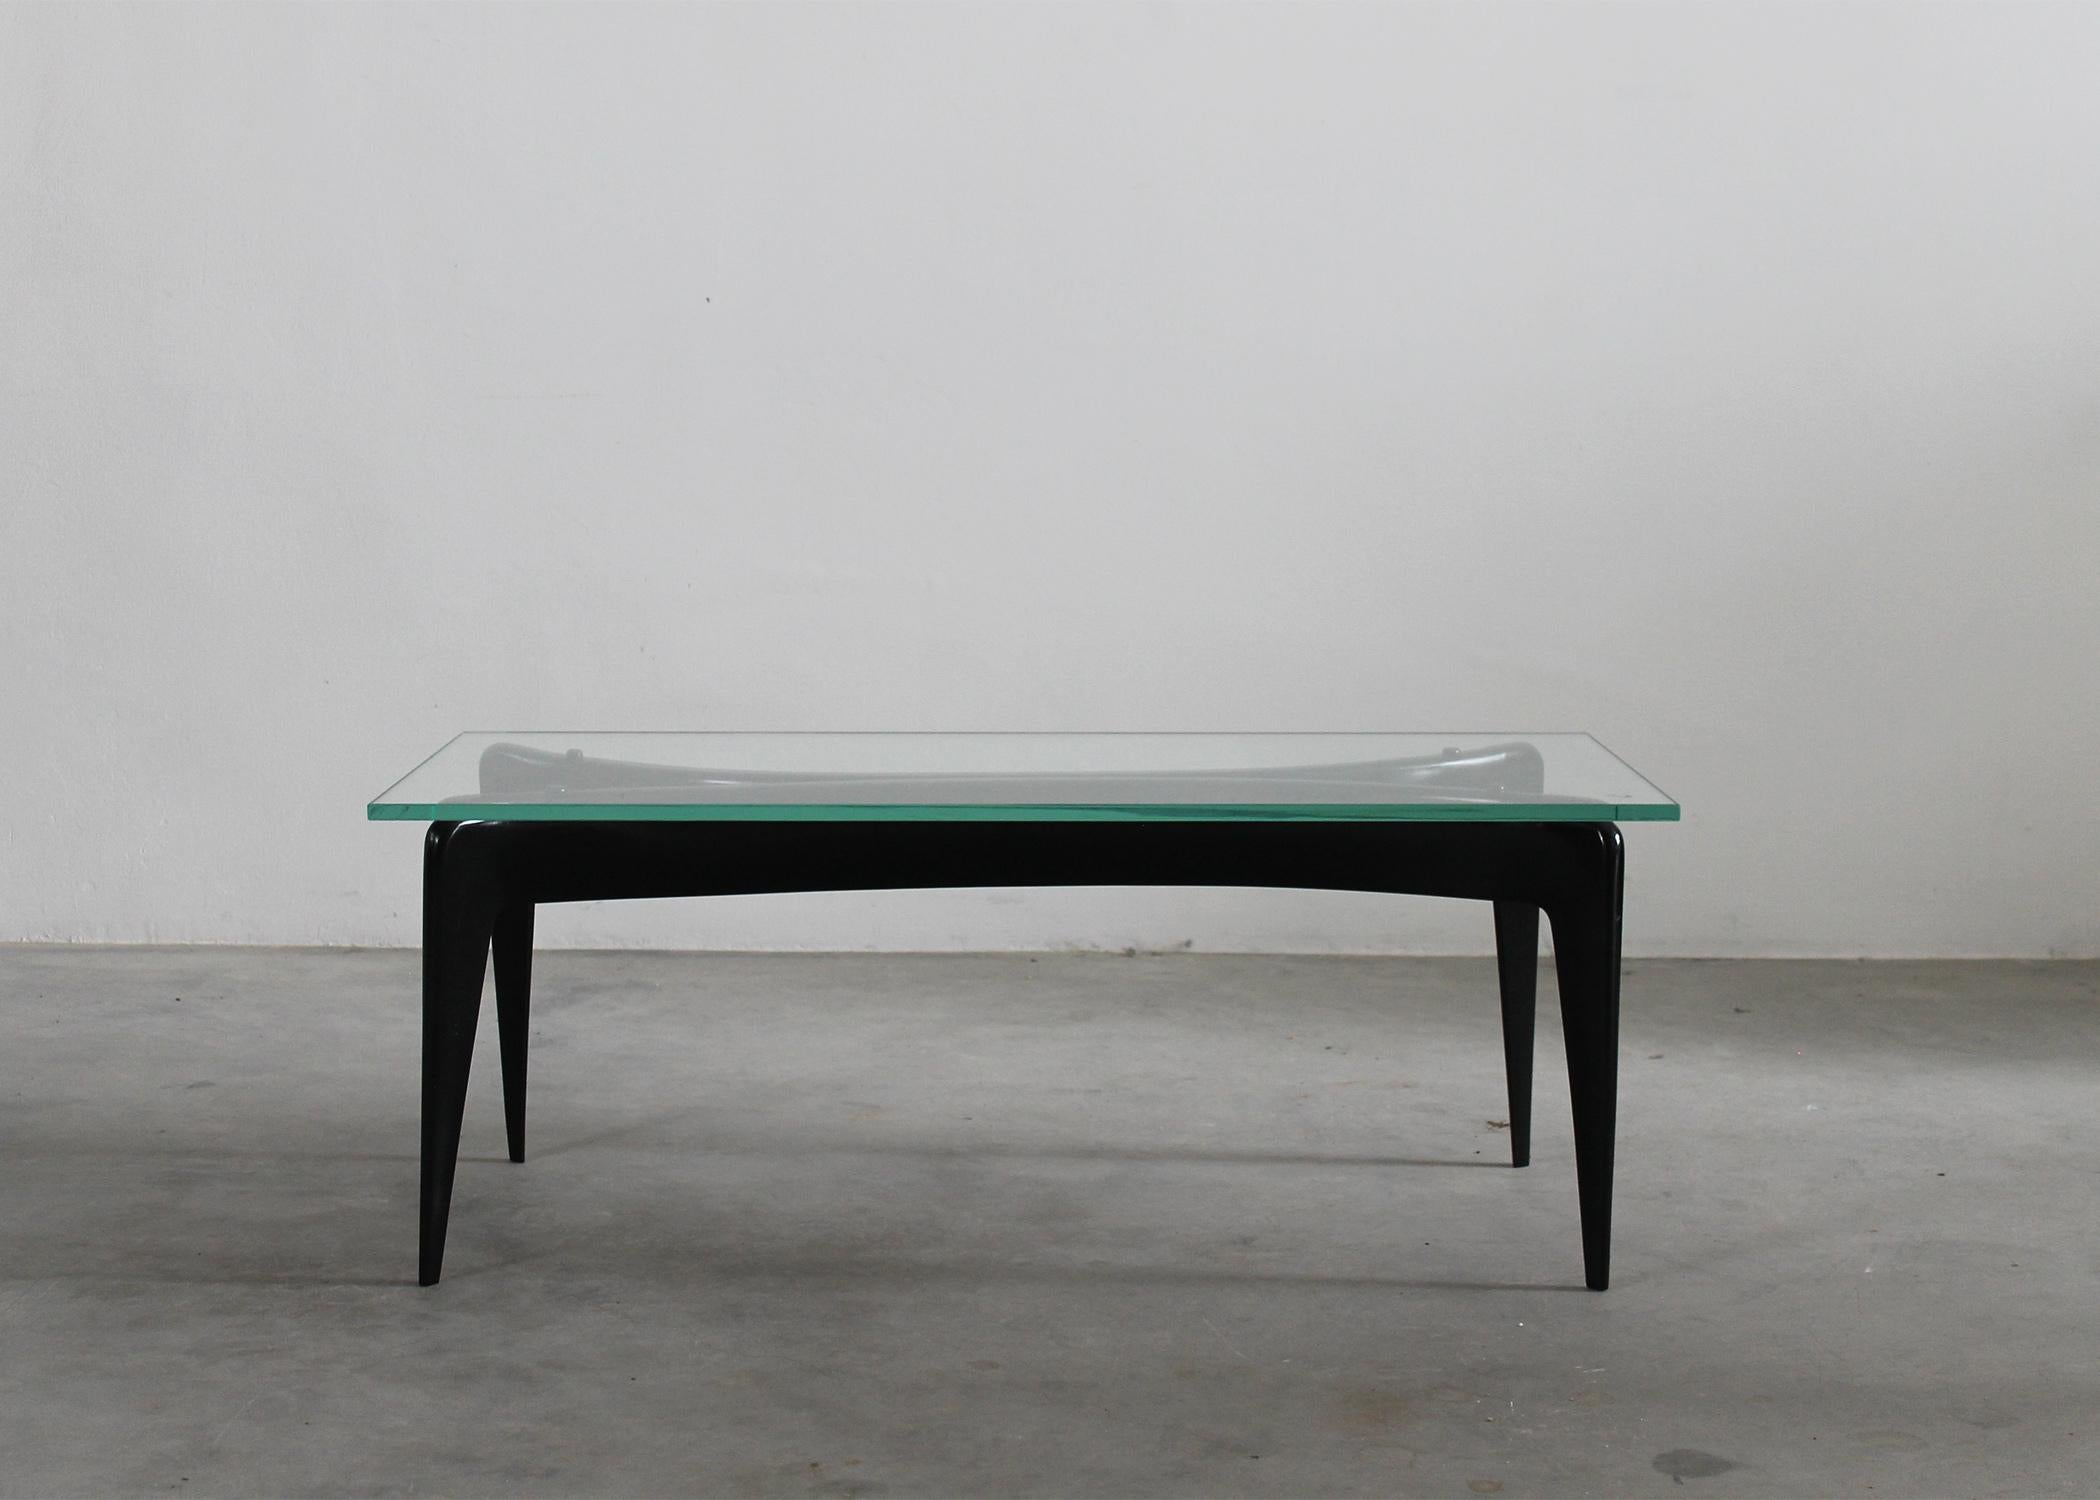 Mid-Century Modern Gio Ponti Rectangular Coffee Table in Wood and Glass by Fontana Arte 1940s Italy